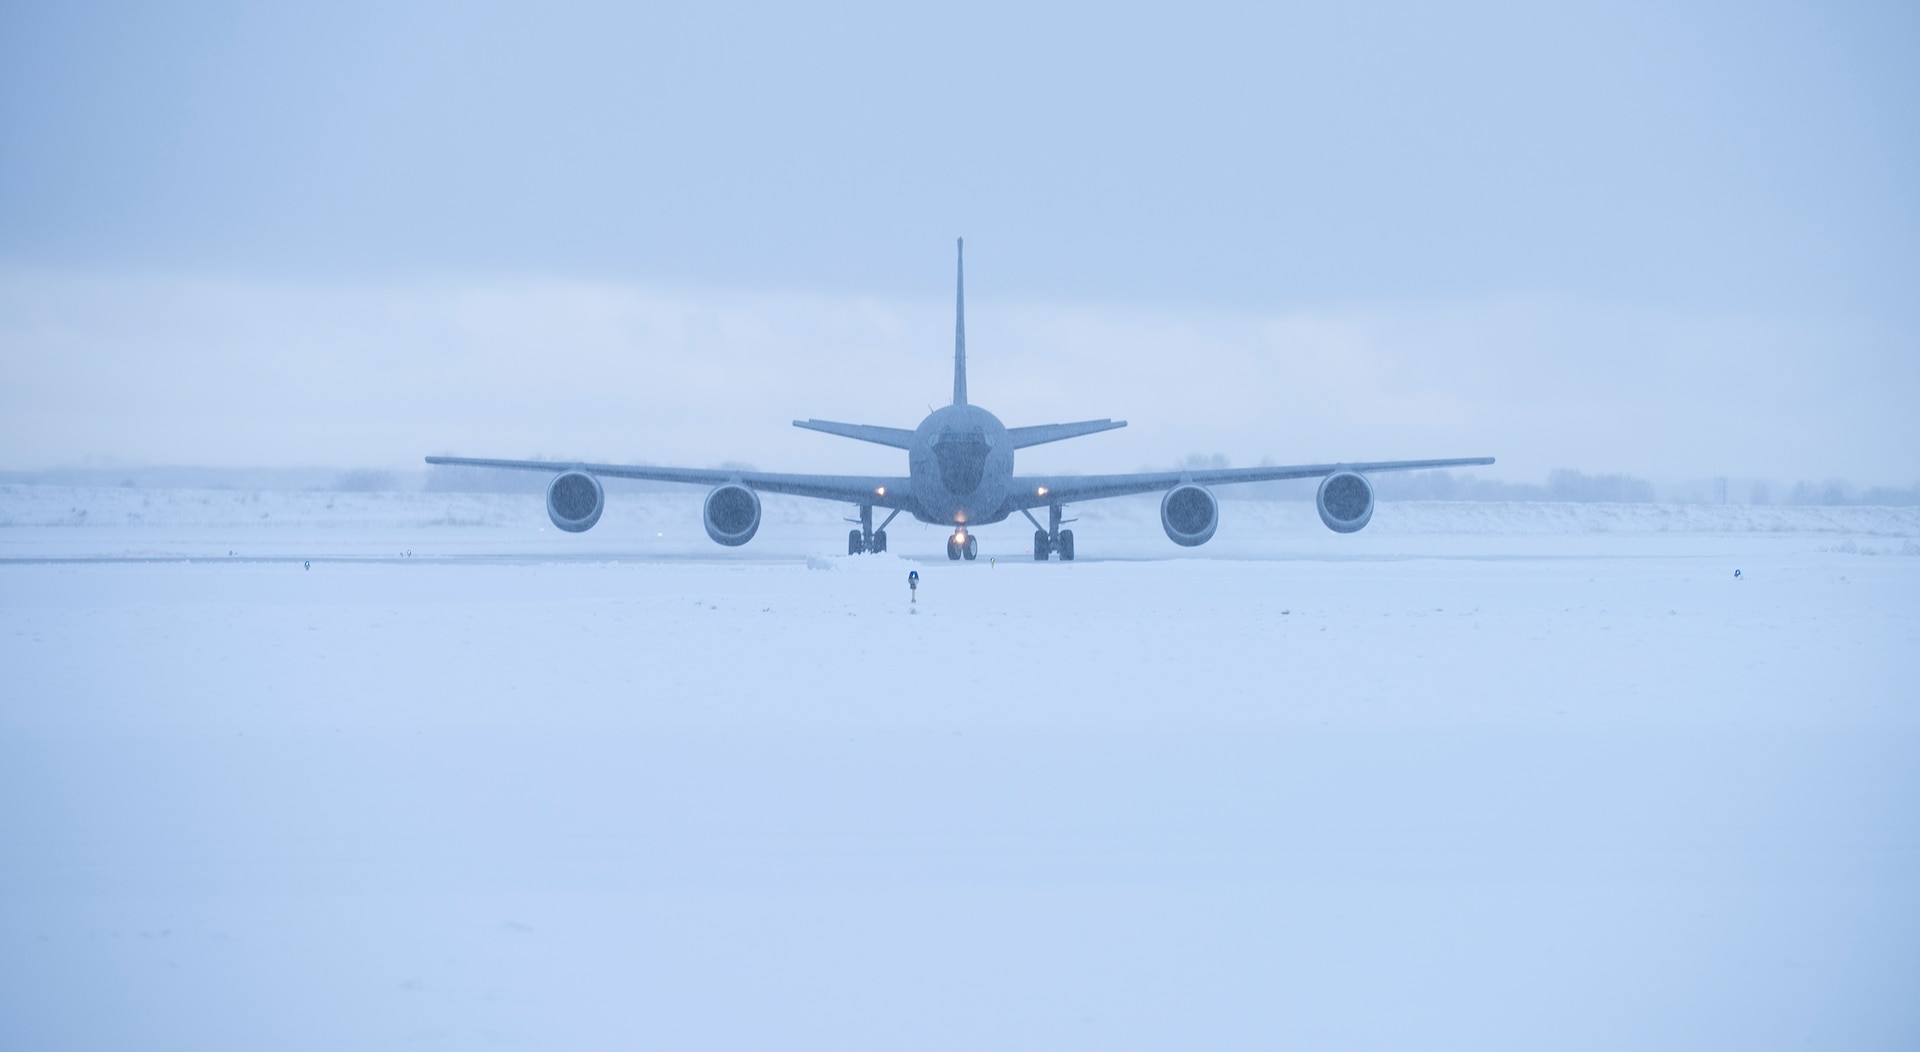 USAF Stratotankers Provide Air Refueling Capabilities for Exercise Cold Response 20